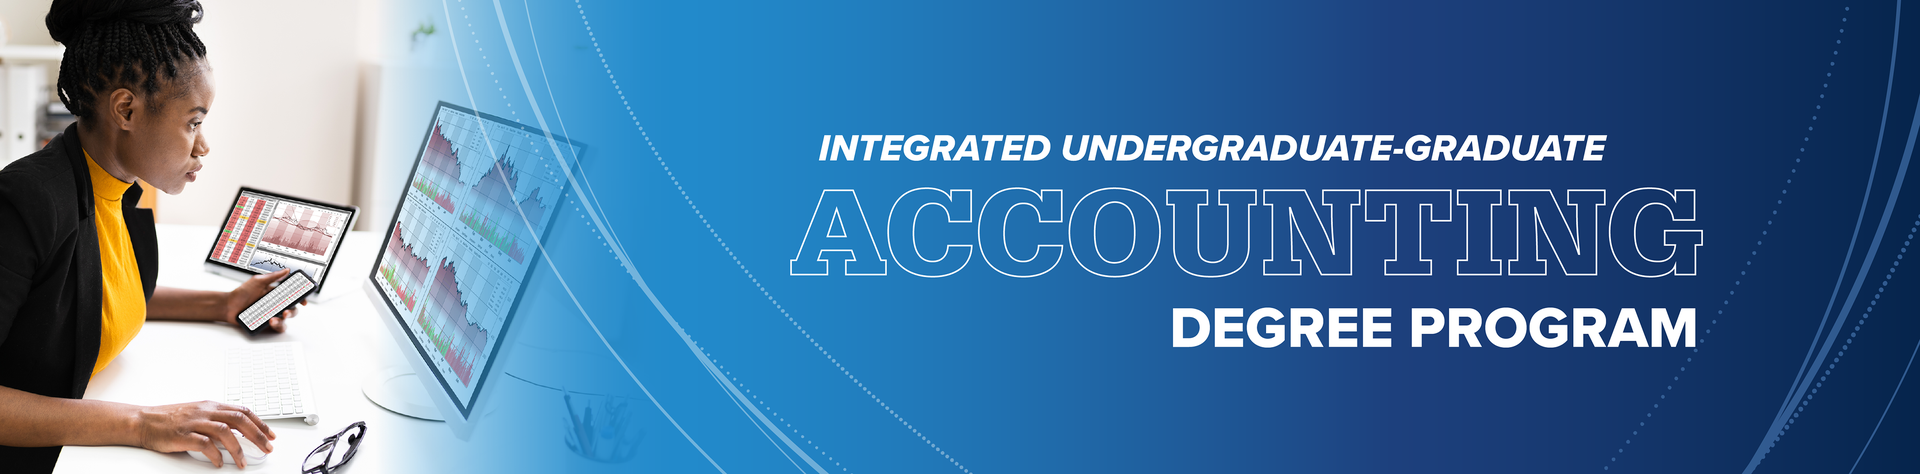 Banner image with a student and the words "integrated undergraduate-graduate accounting degree program"